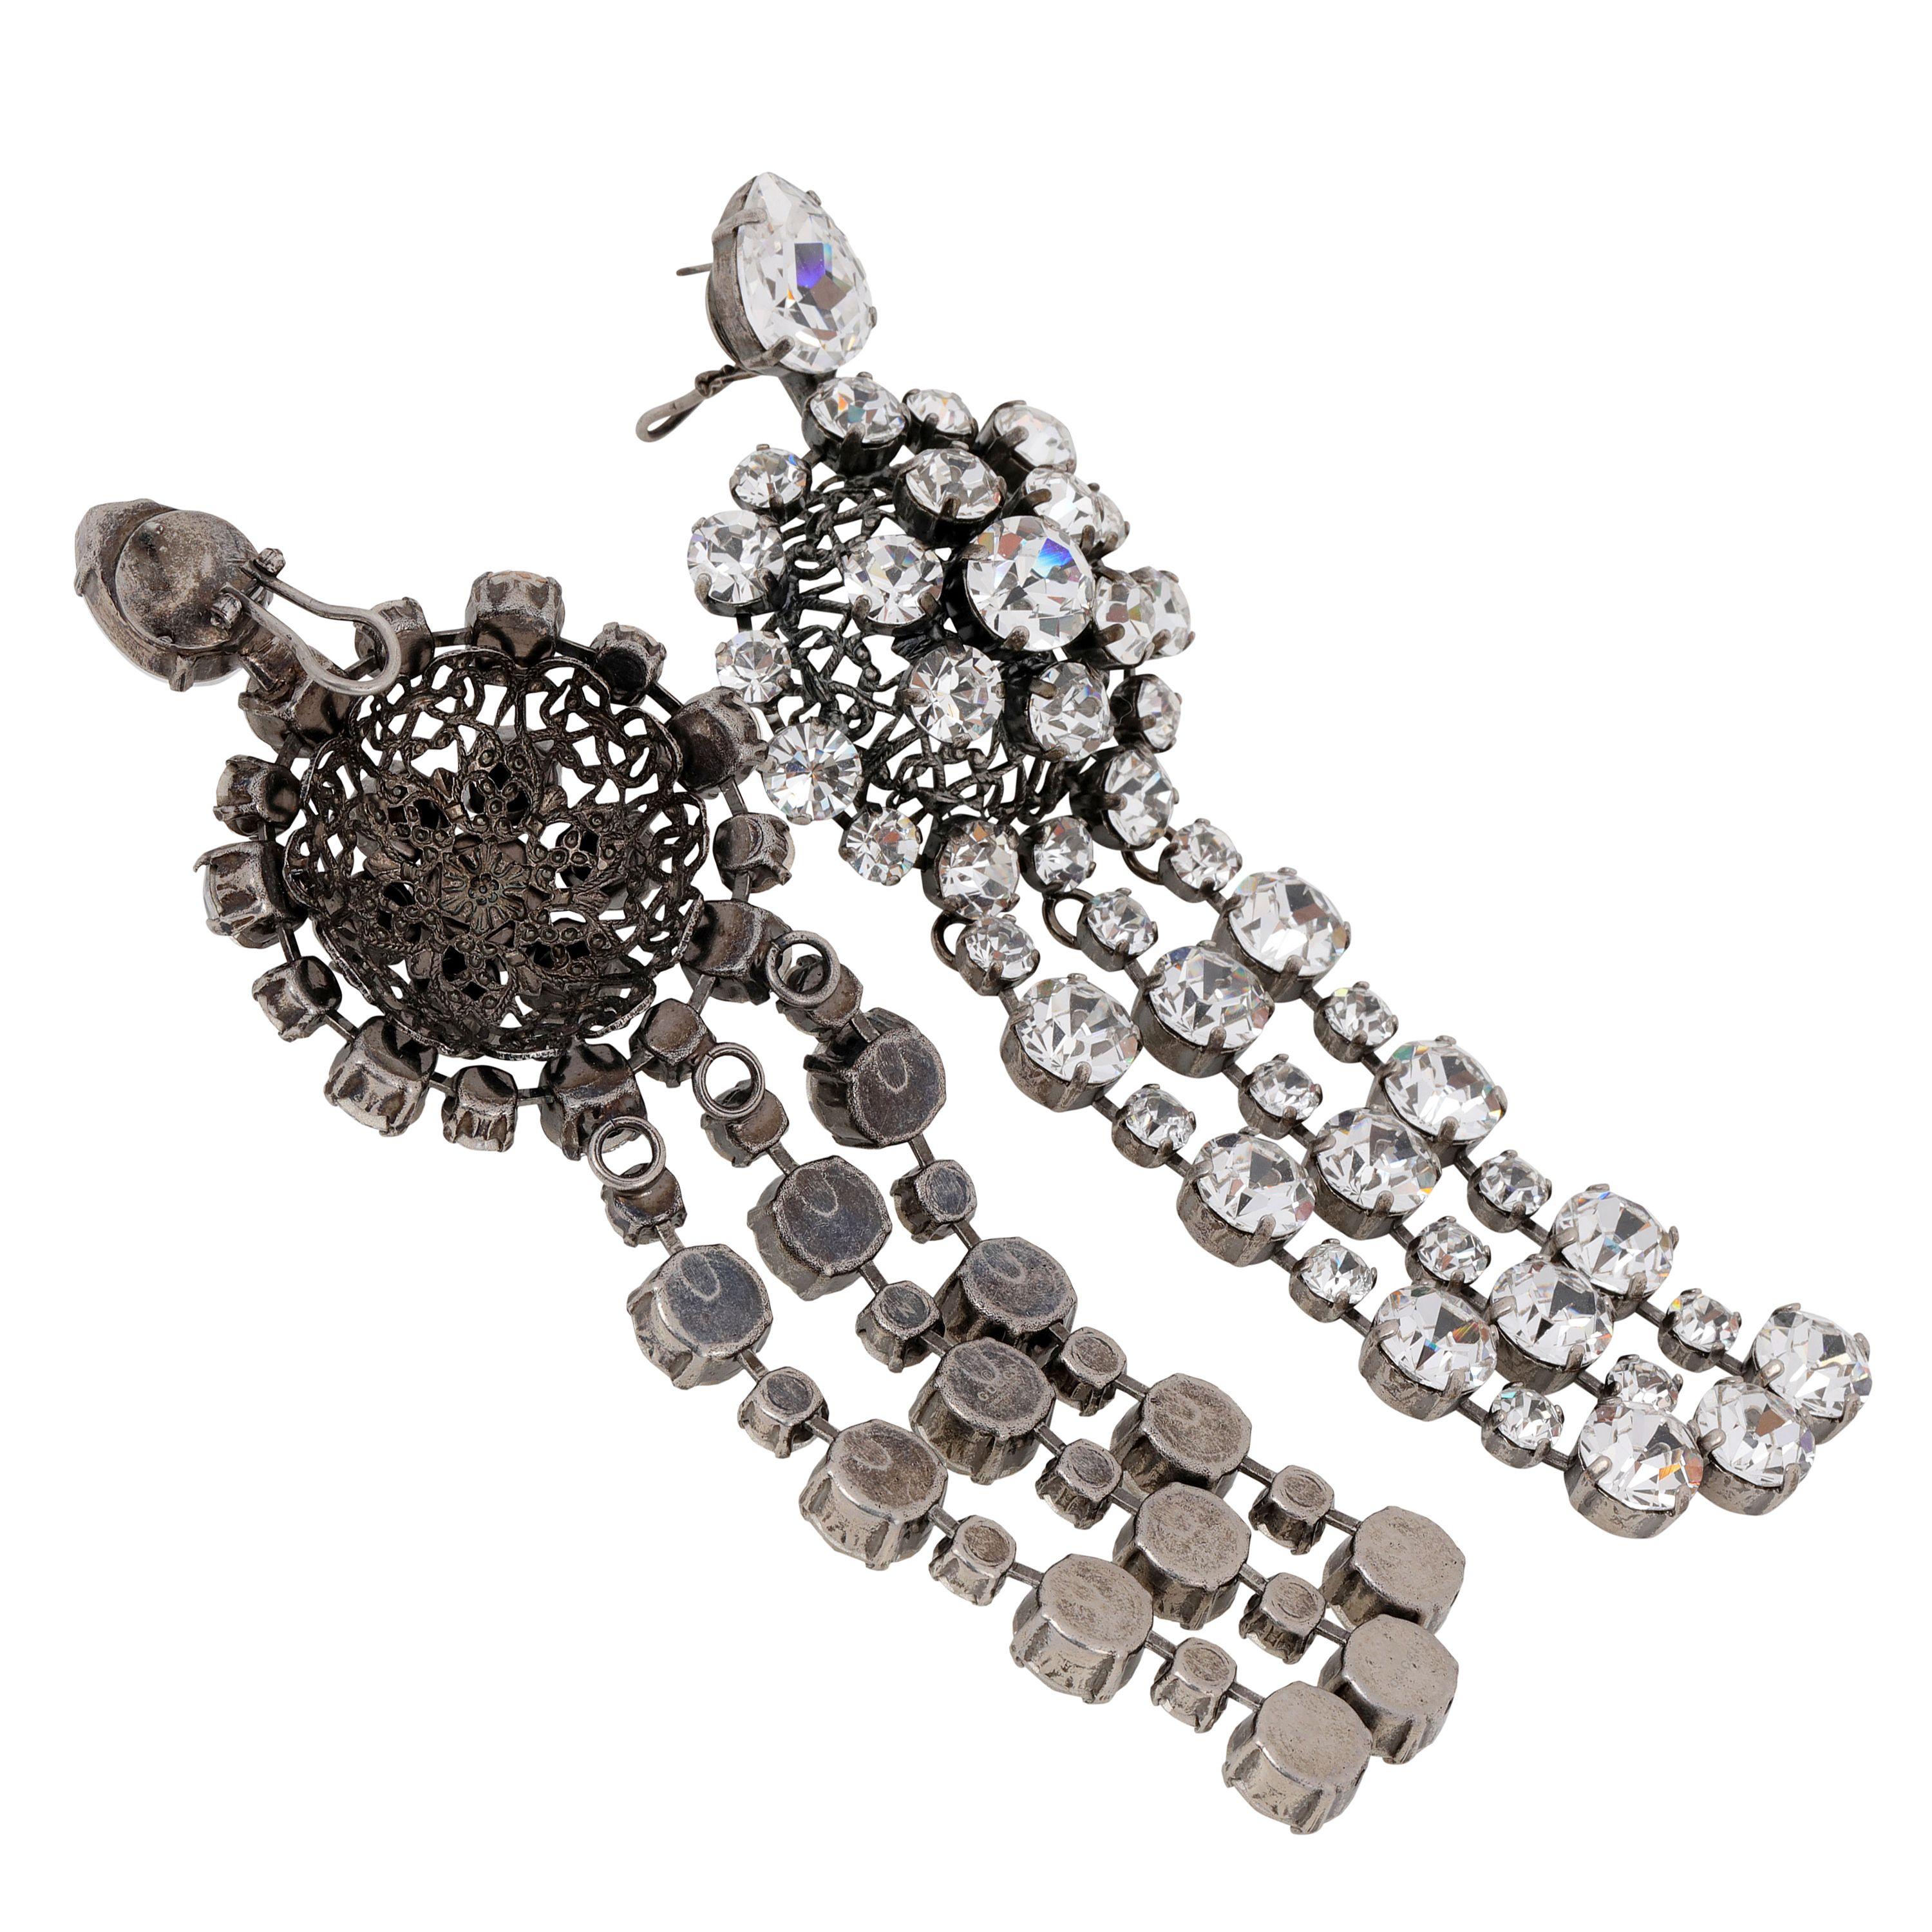 These authentic Gucci Large Crystal Chandelier Earrings are in excellent condition.  Rhodium plated dangling crystal statement earrings with lever backs.  Pouch or box included.

PBF 13765
